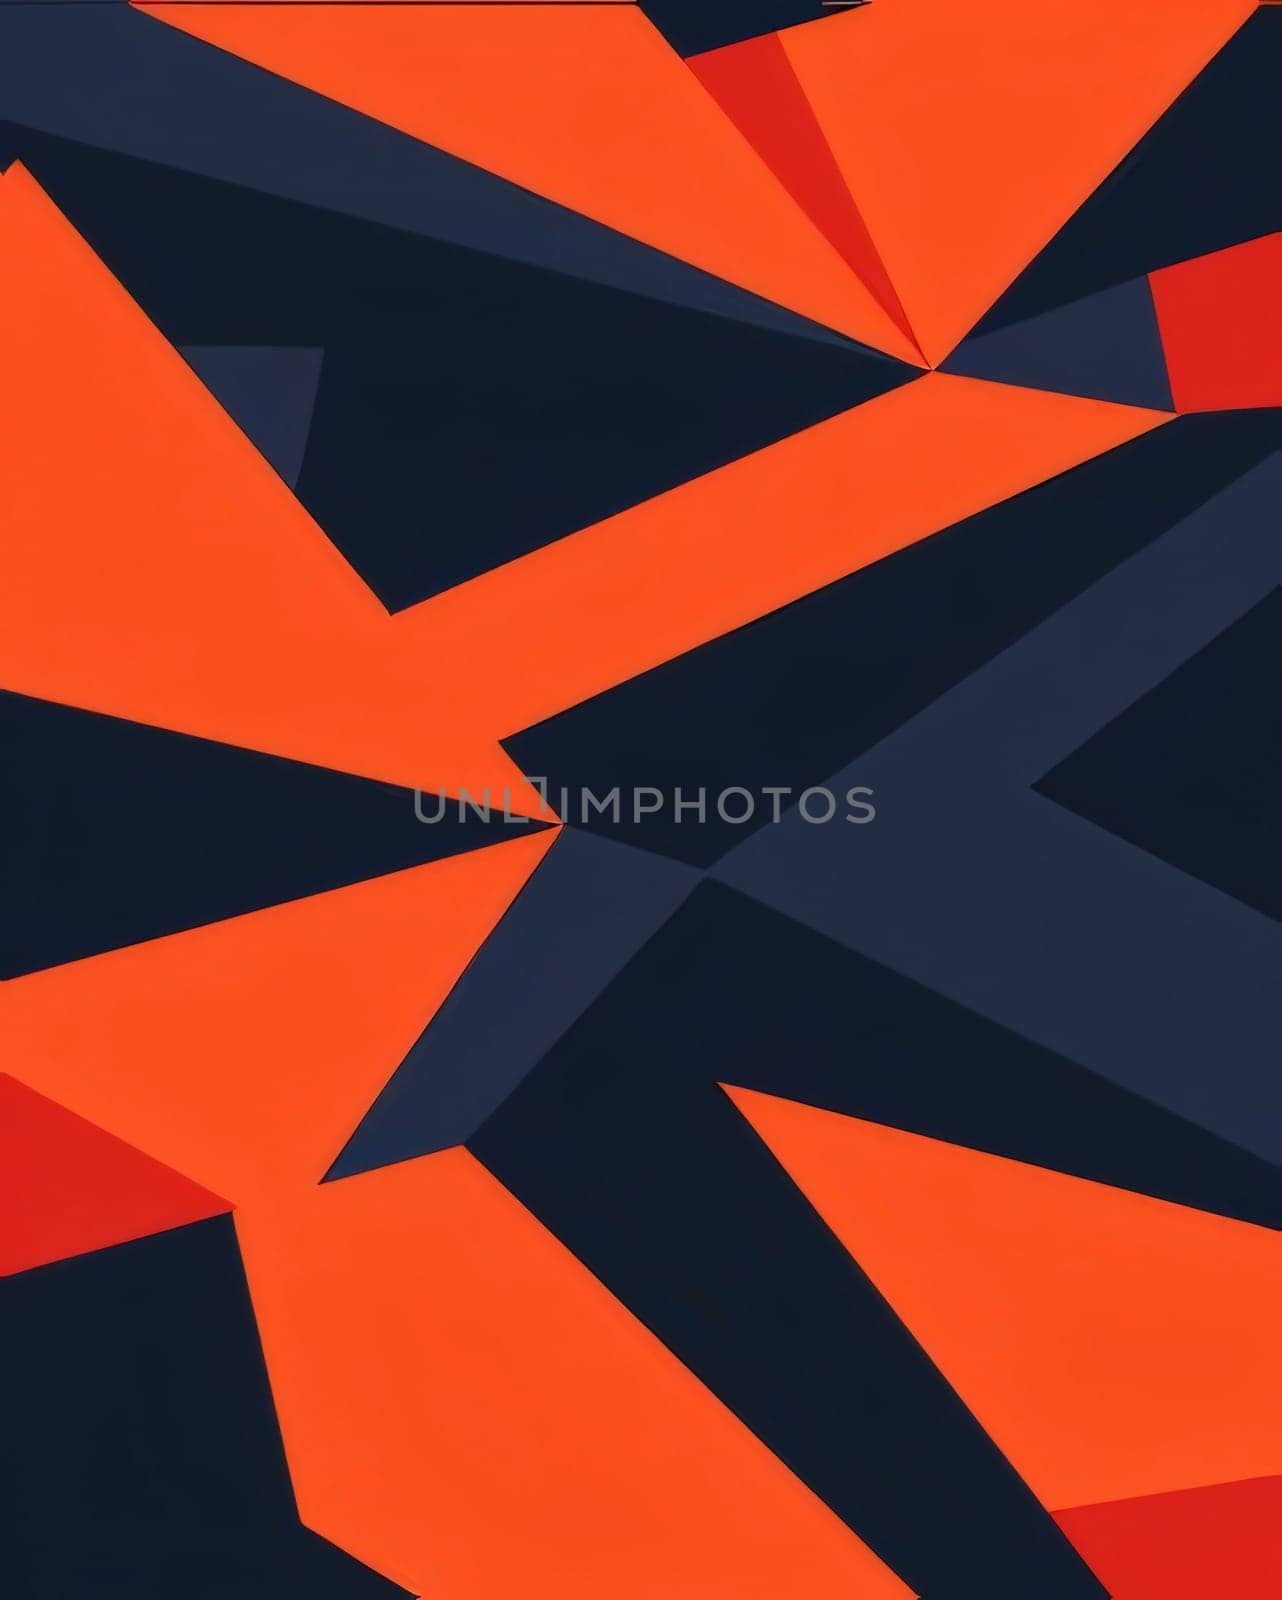 Abstract background design: Abstract background with geometric shapes in orange, black and black colors.